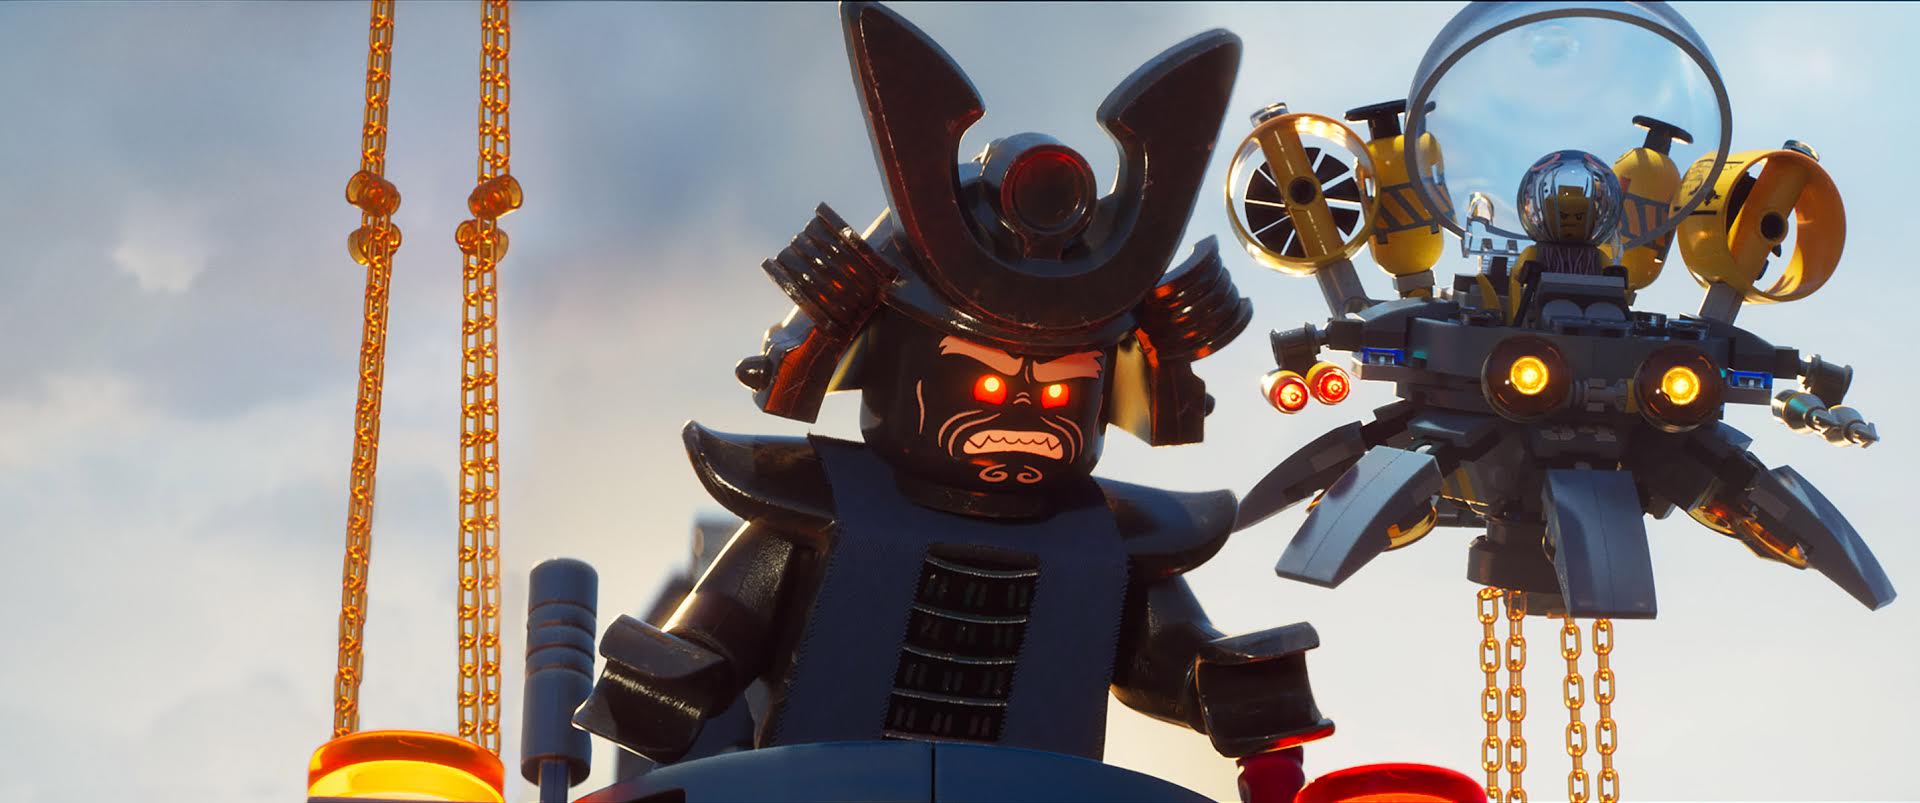  Garmadon (voiced by JUSTIN THEROUX) in the new animated adventure &ldquo;THE LEGO&reg; NINJAGO MOVIE,&rdquo; from Warner Bros. Pictures and Warner Animation Group, in association with LEGO System A/S, a Warner Bros. Pictures release. 